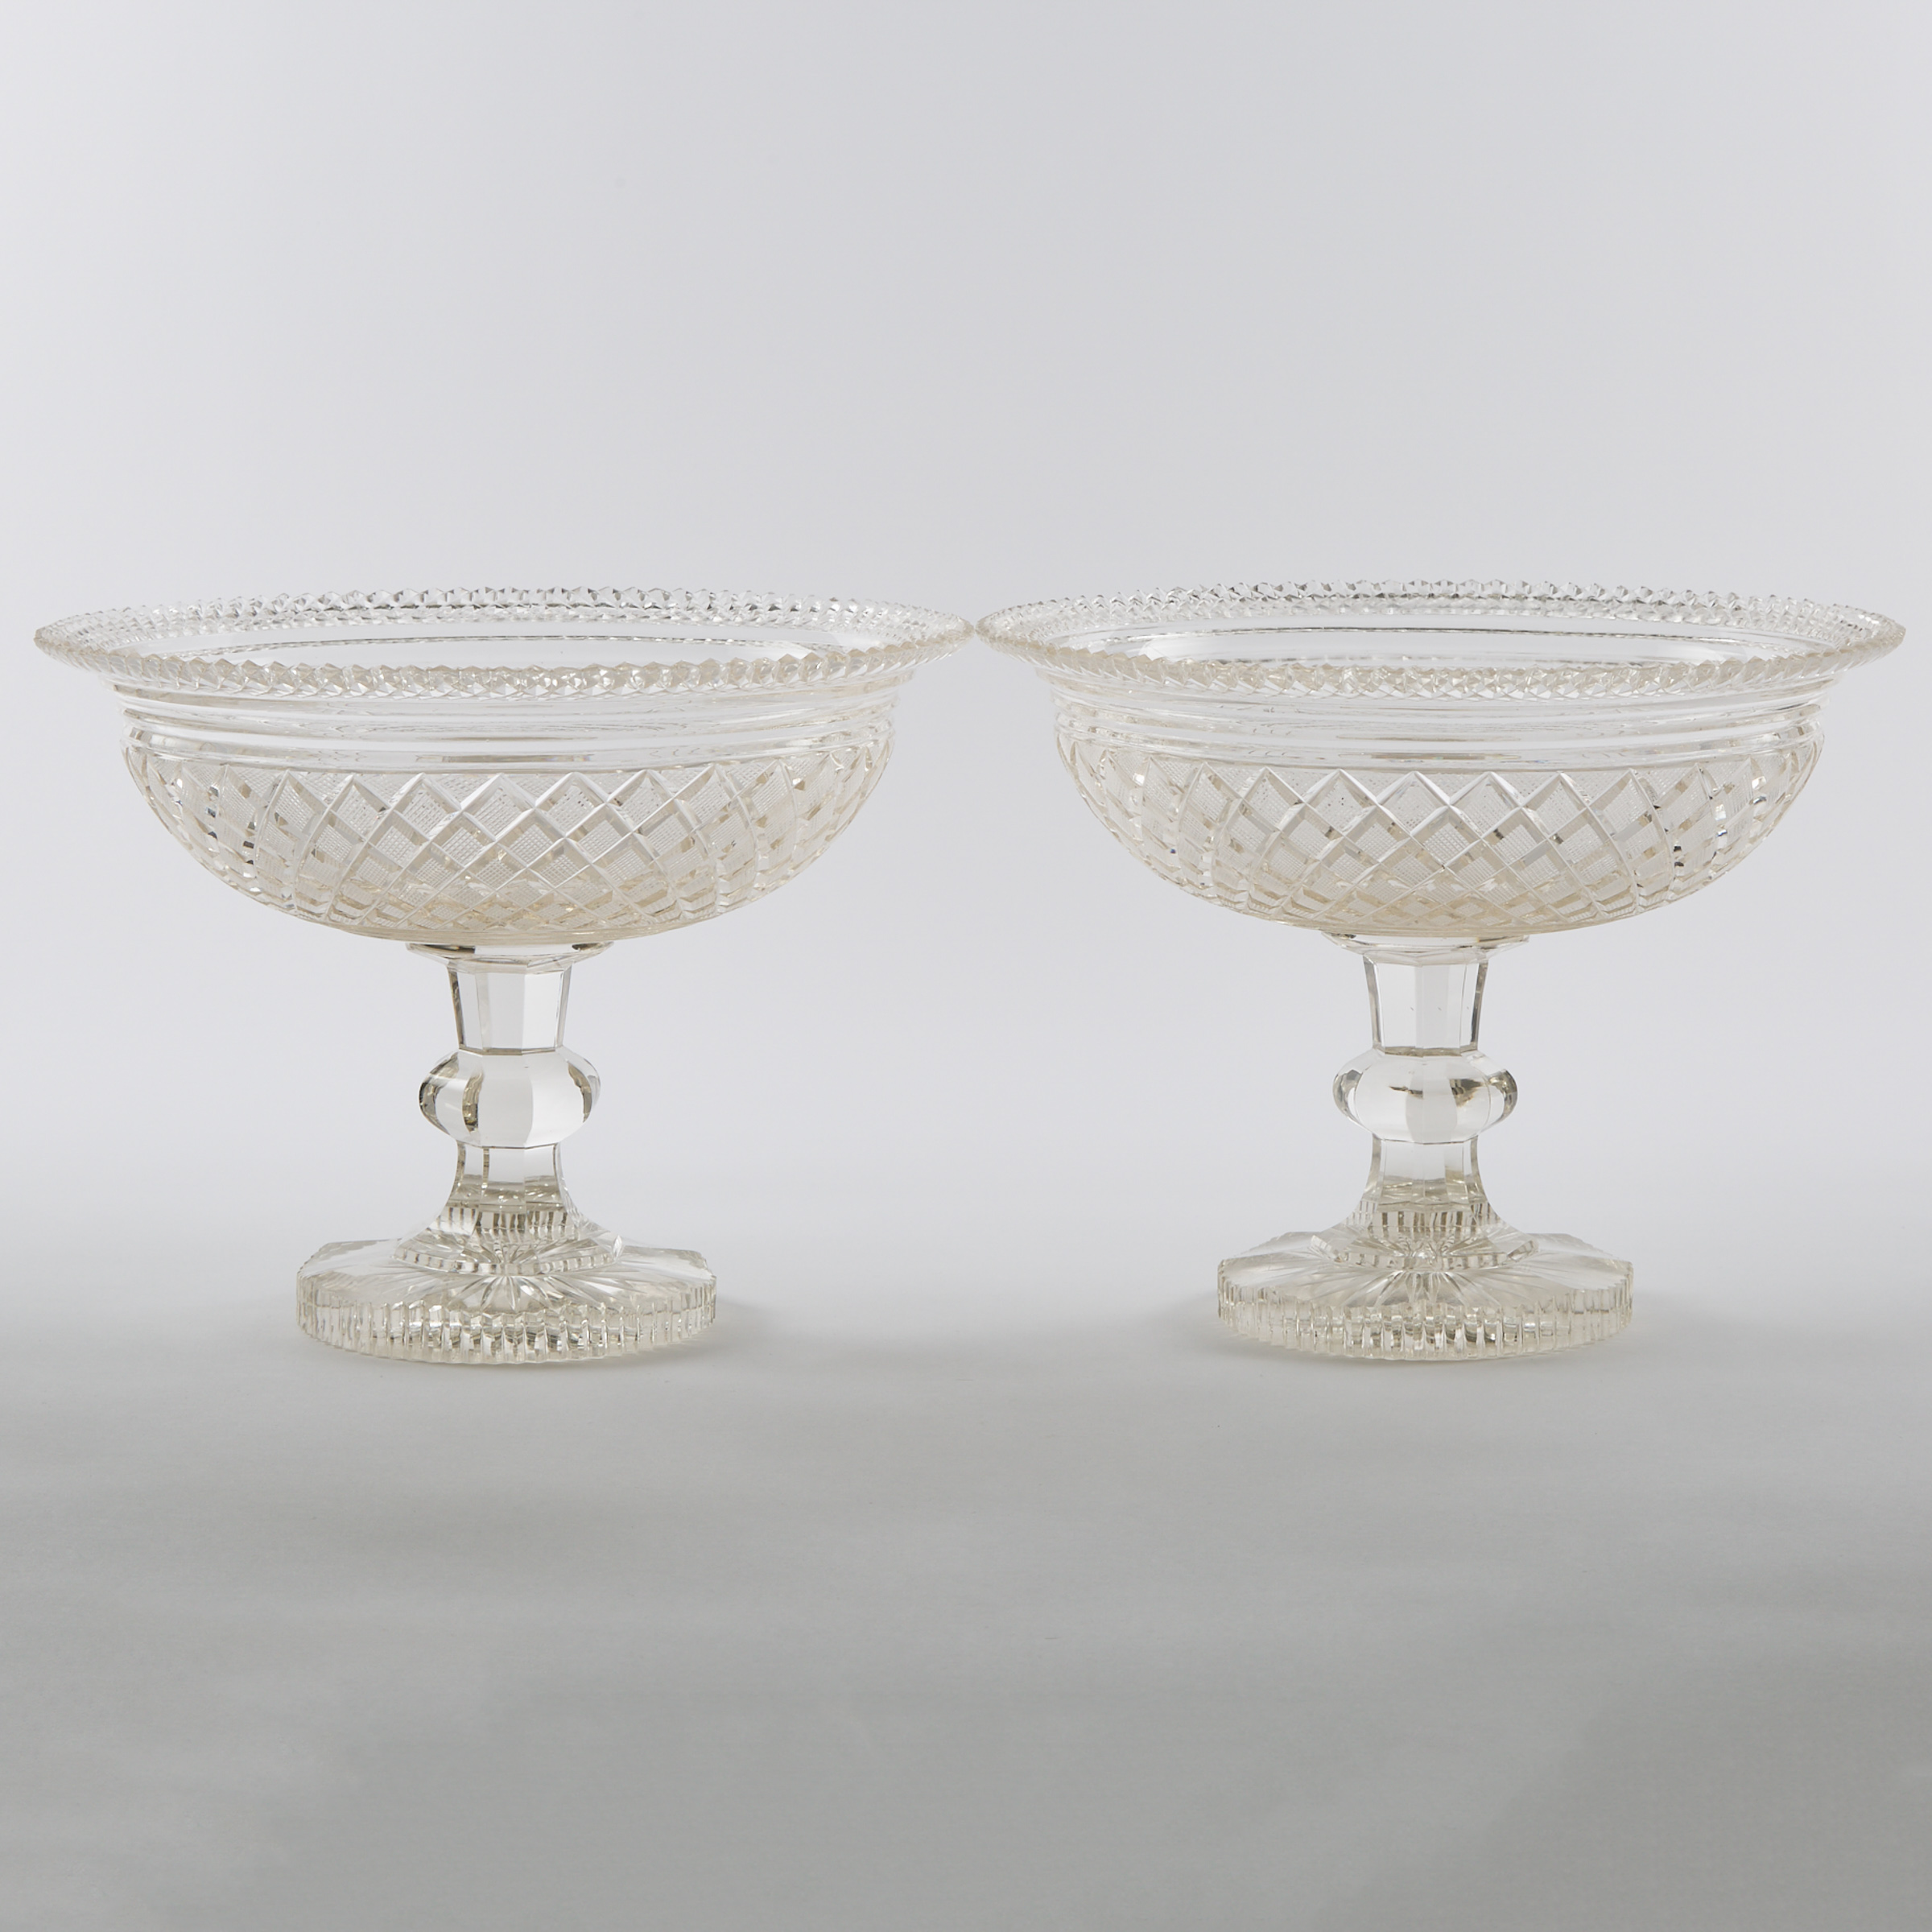 Pair of Continental Cut Glass Footed